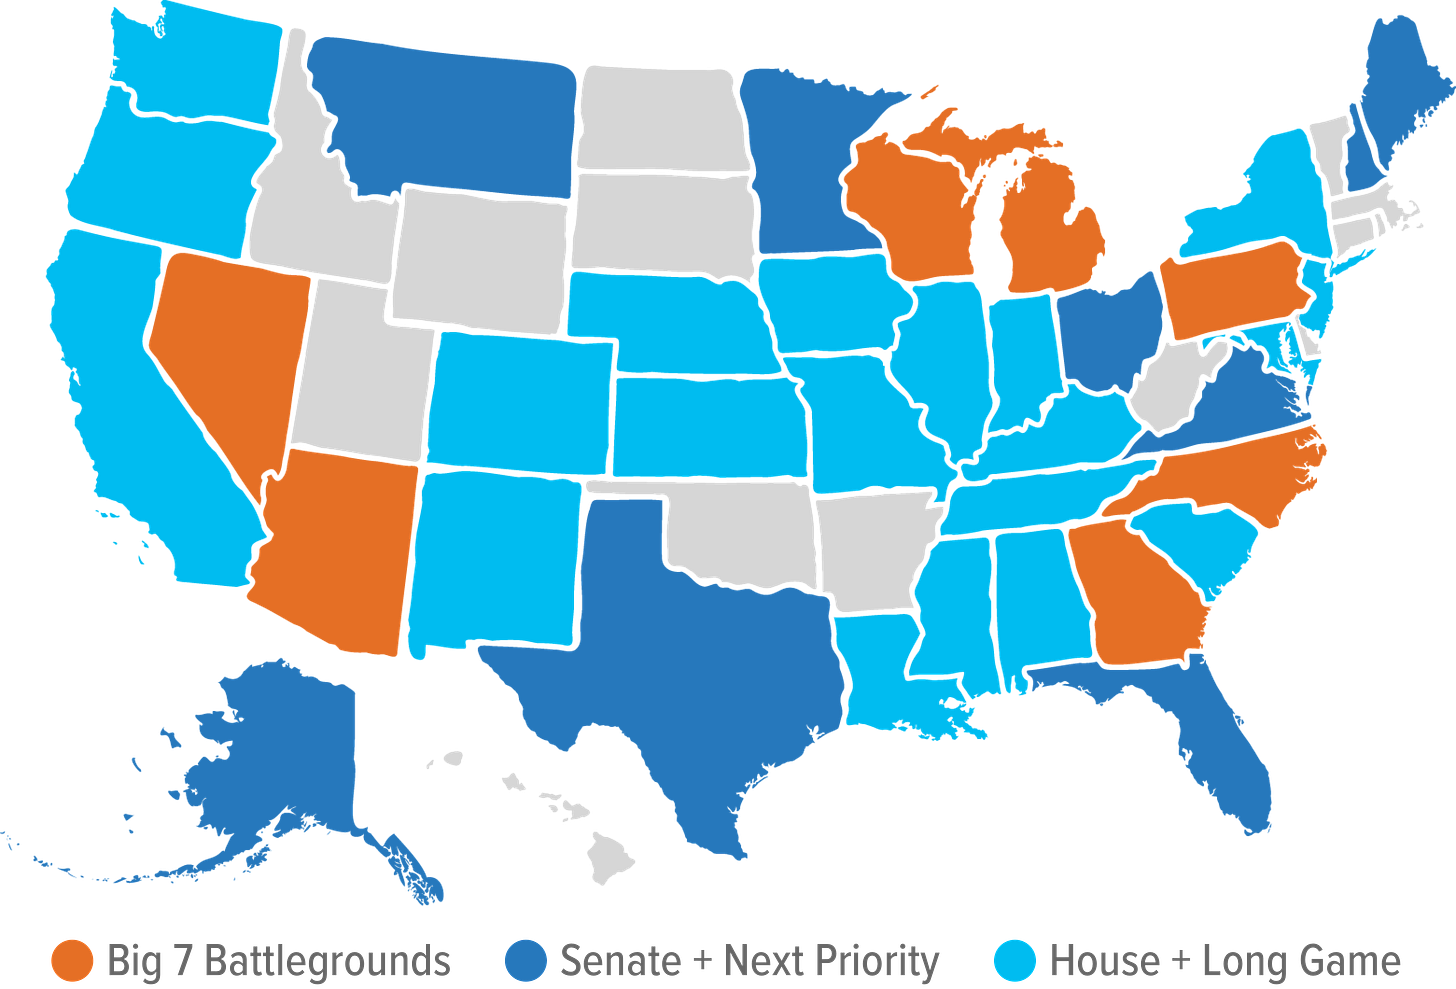 Map of MVP's 2024 state targeting, showing Big 7 Battlegrounds, Senate + Next Priority, and House + Long Game states